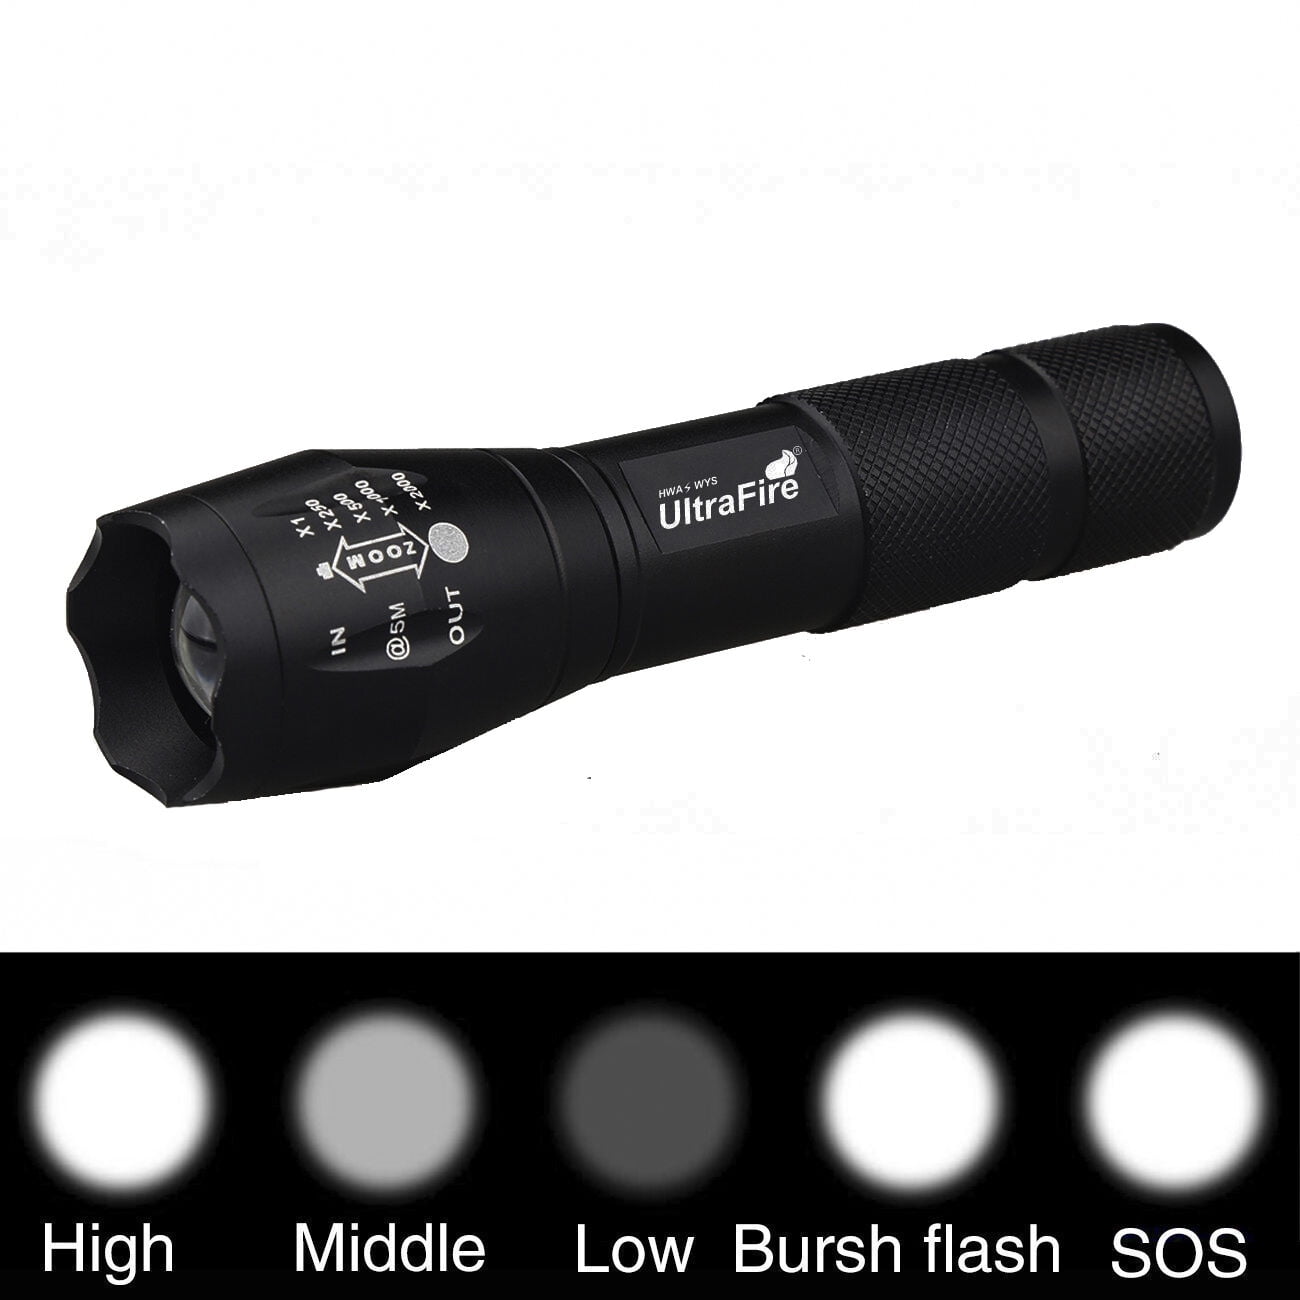 UltraFire Tactical Flashlight 990000LM CREE T6 LED Zoomable Rechargeable Torch Lamp Royal 